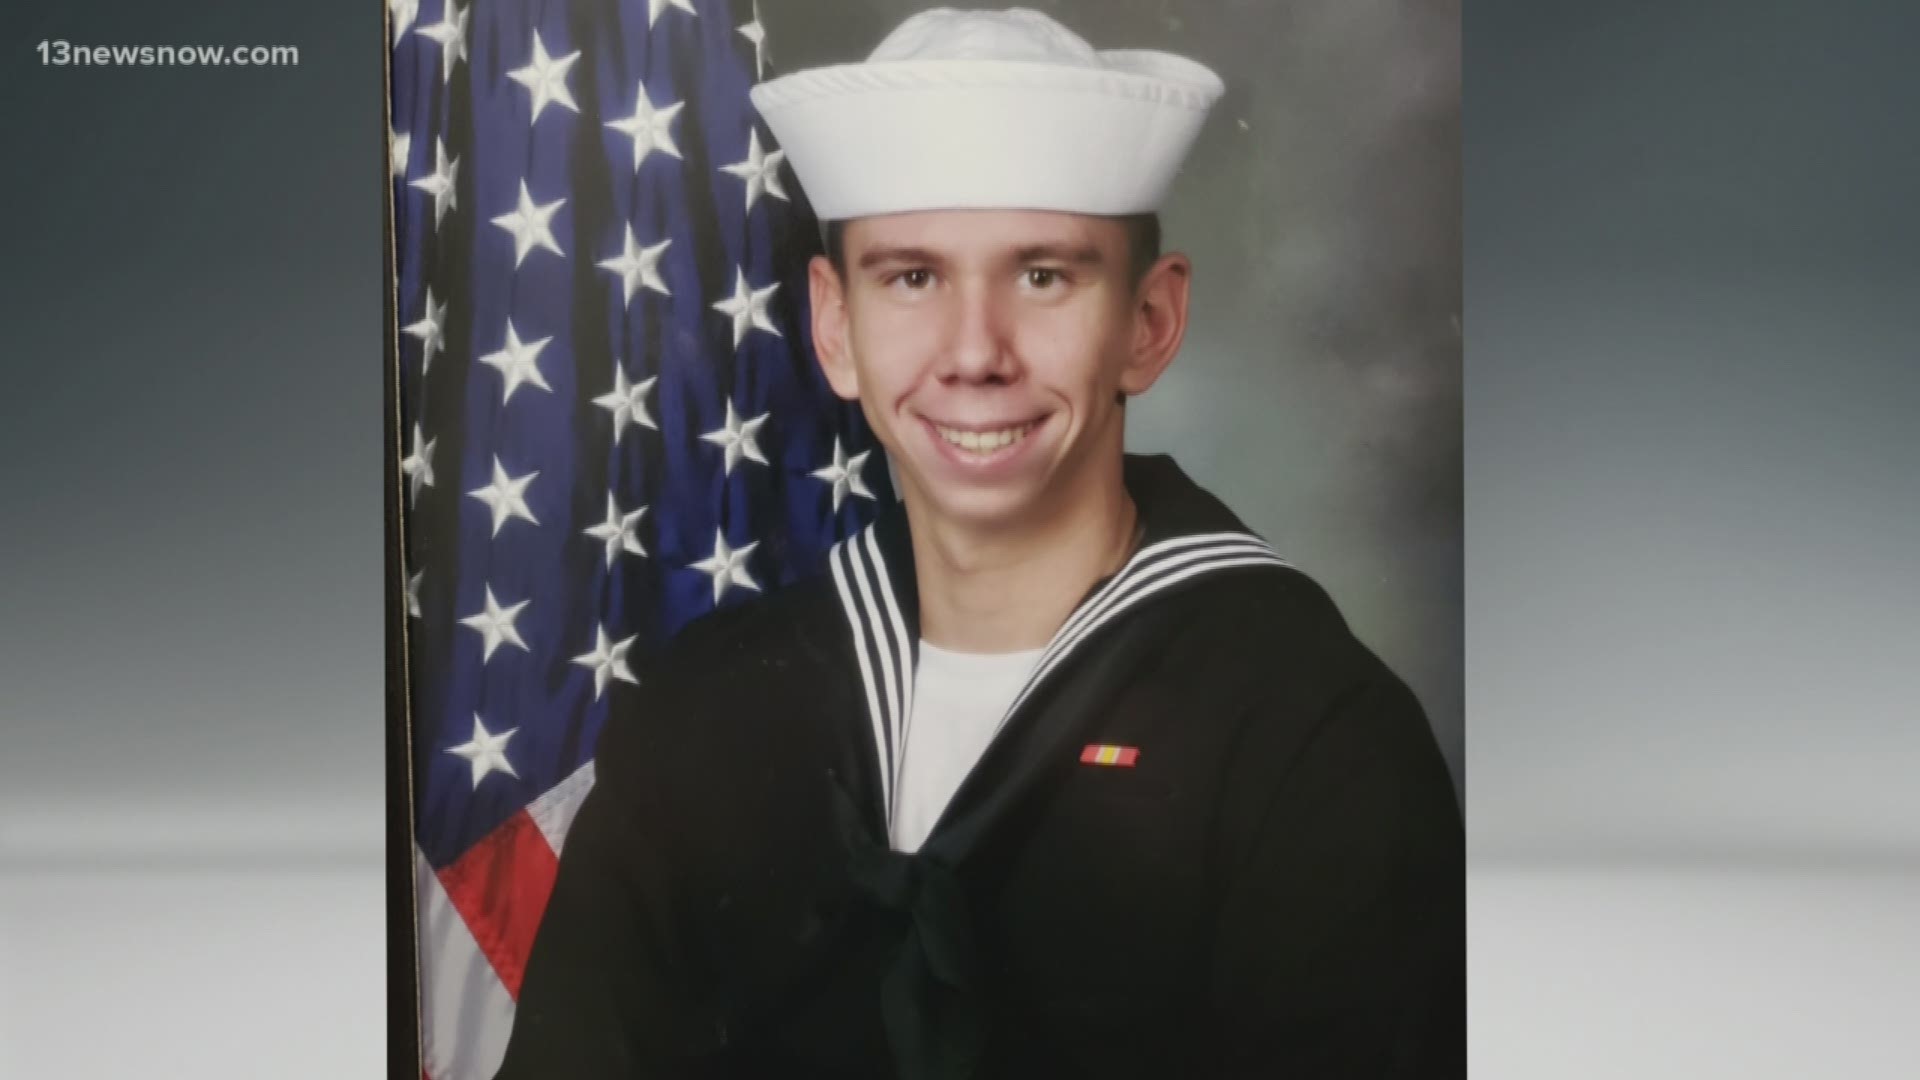 Brandon Caserta, 21, was a sailor. He died by suicide while stationed in Norfolk. His parents hope new legislation will protect future military men and women.